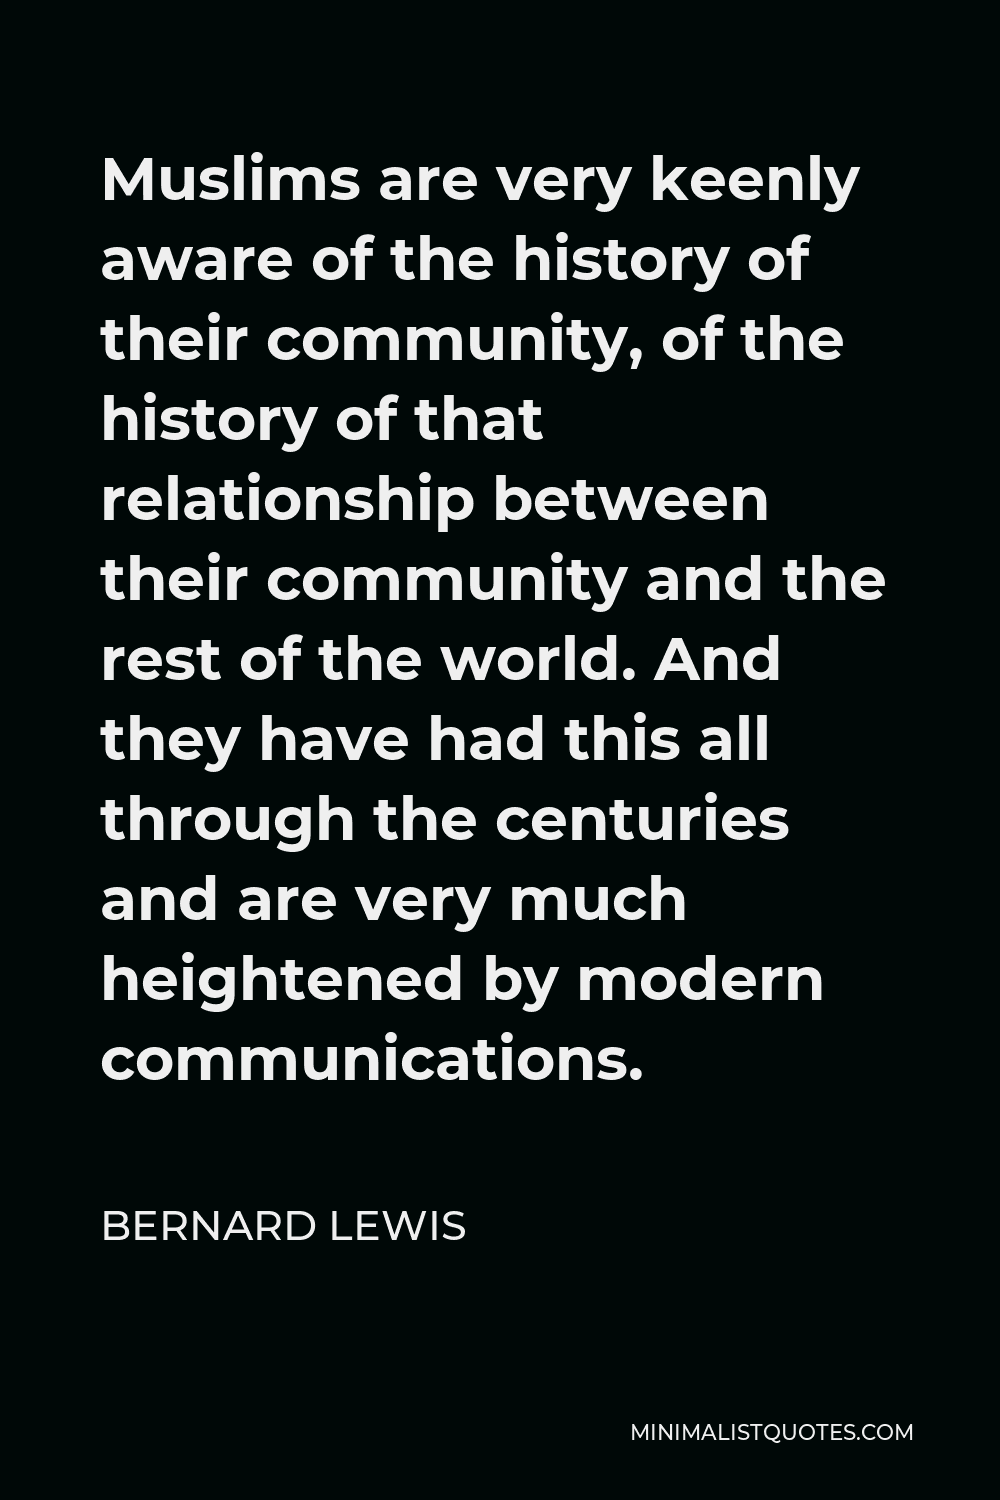 Bernard Lewis Quote - Muslims are very keenly aware of the history of their community, of the history of that relationship between their community and the rest of the world. And they have had this all through the centuries and are very much heightened by modern communications.